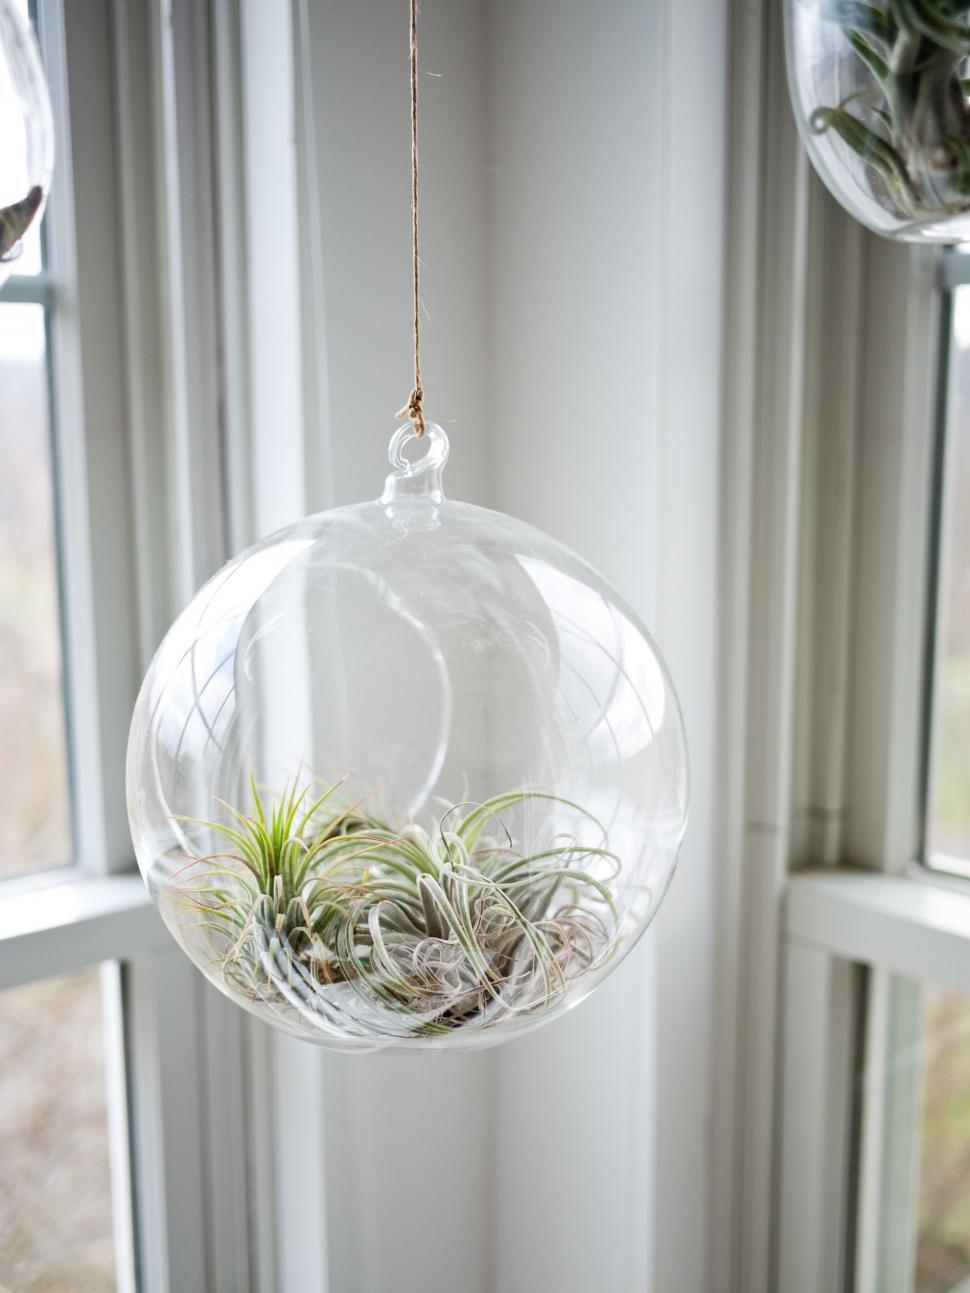 Free Image of Glass Ball Hanging From Window With Air Plants 